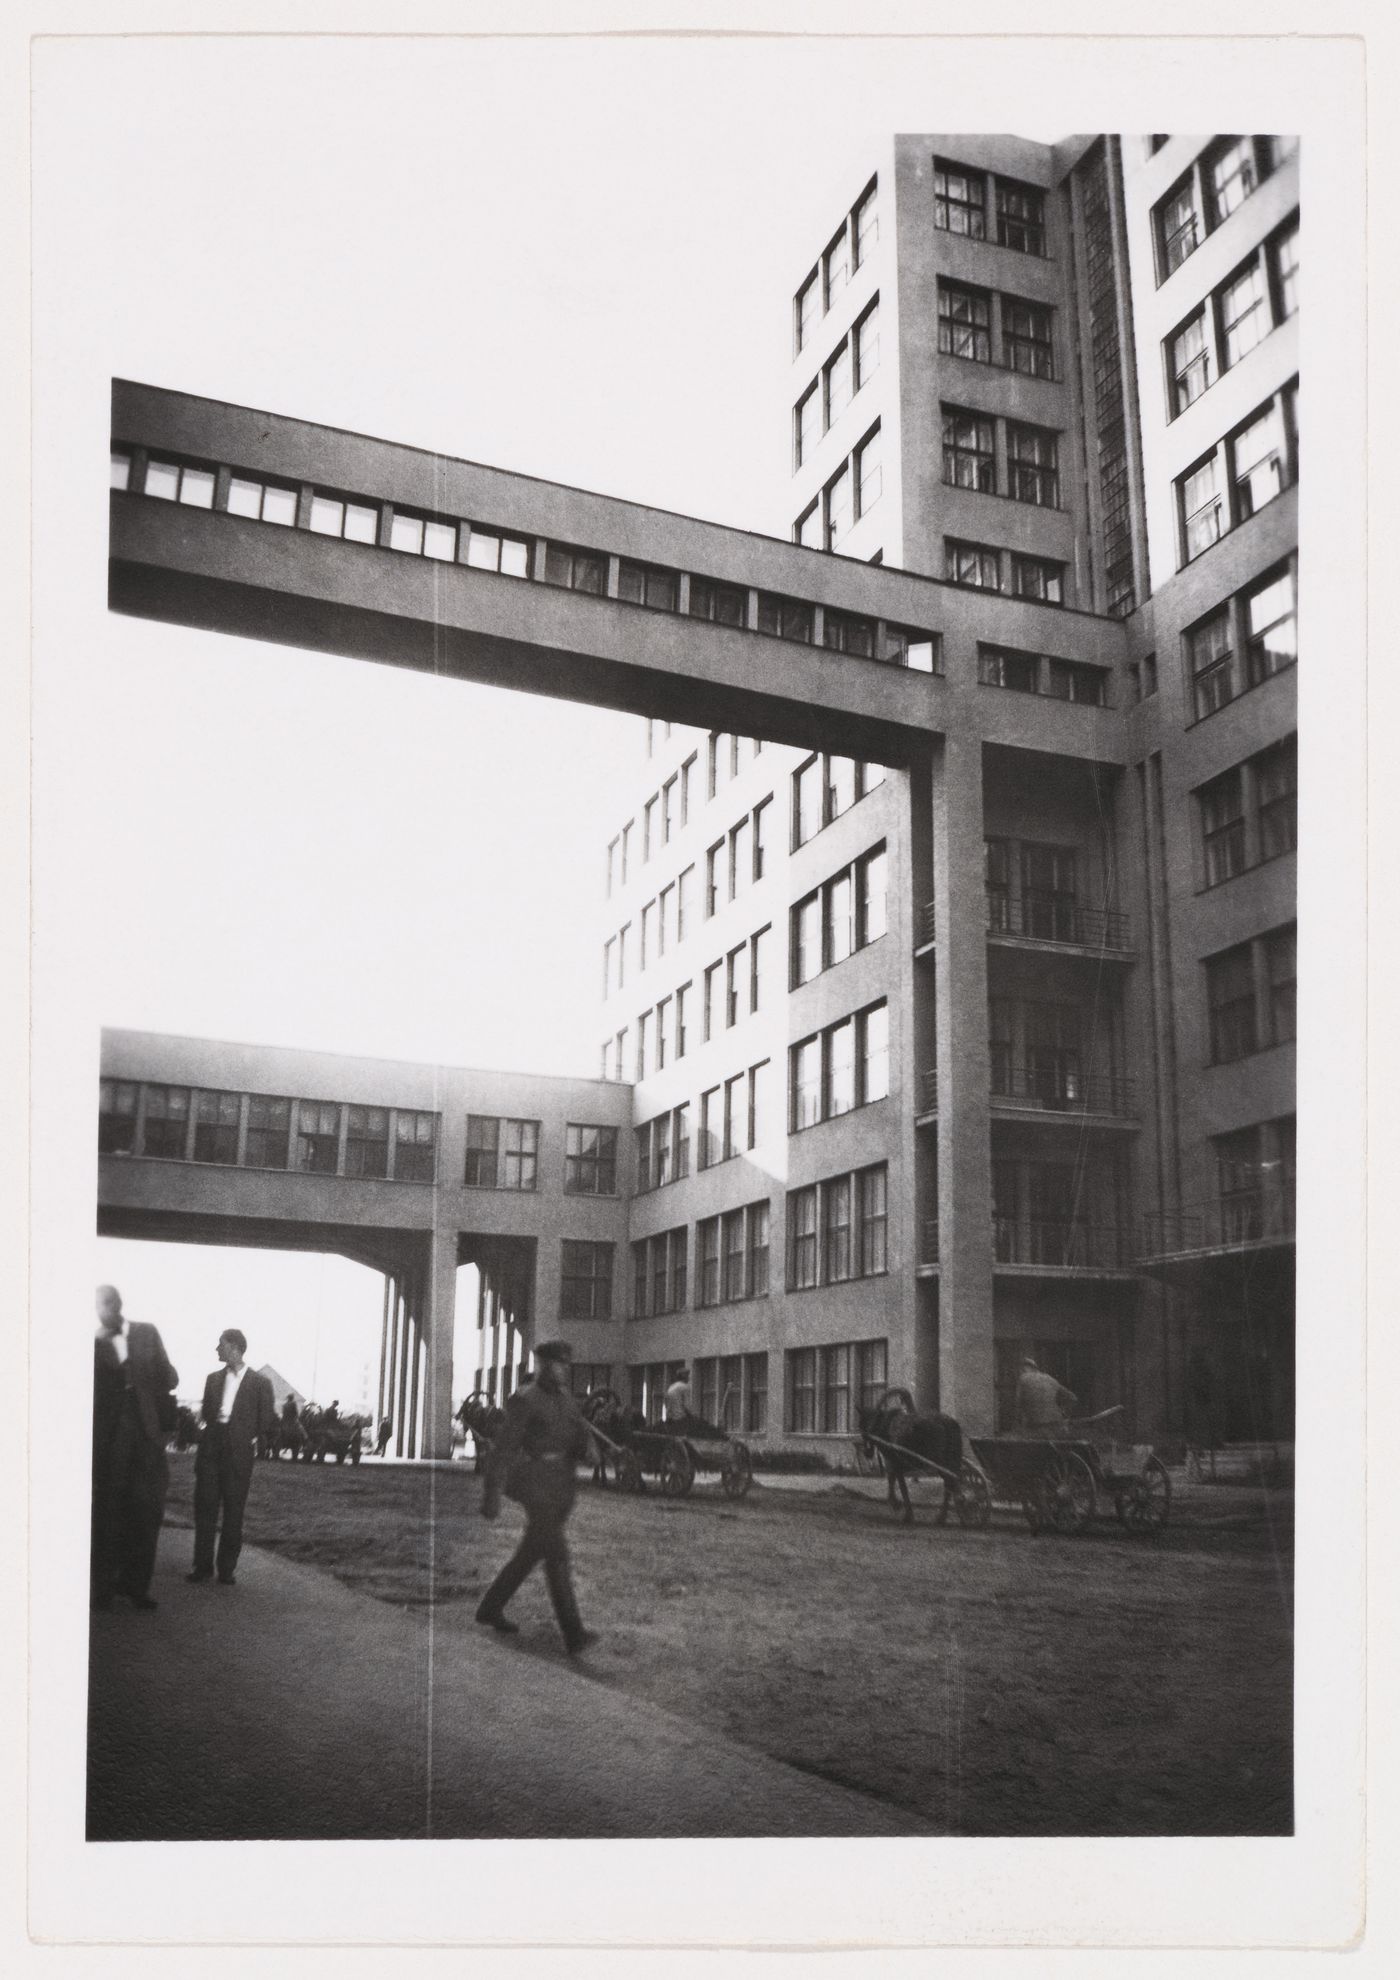 Exterior view of the Department of Industry and Planning (Gosprom) buildings showing the elevated walkways, Kharkov, Soviet Union (now in Ukraine)